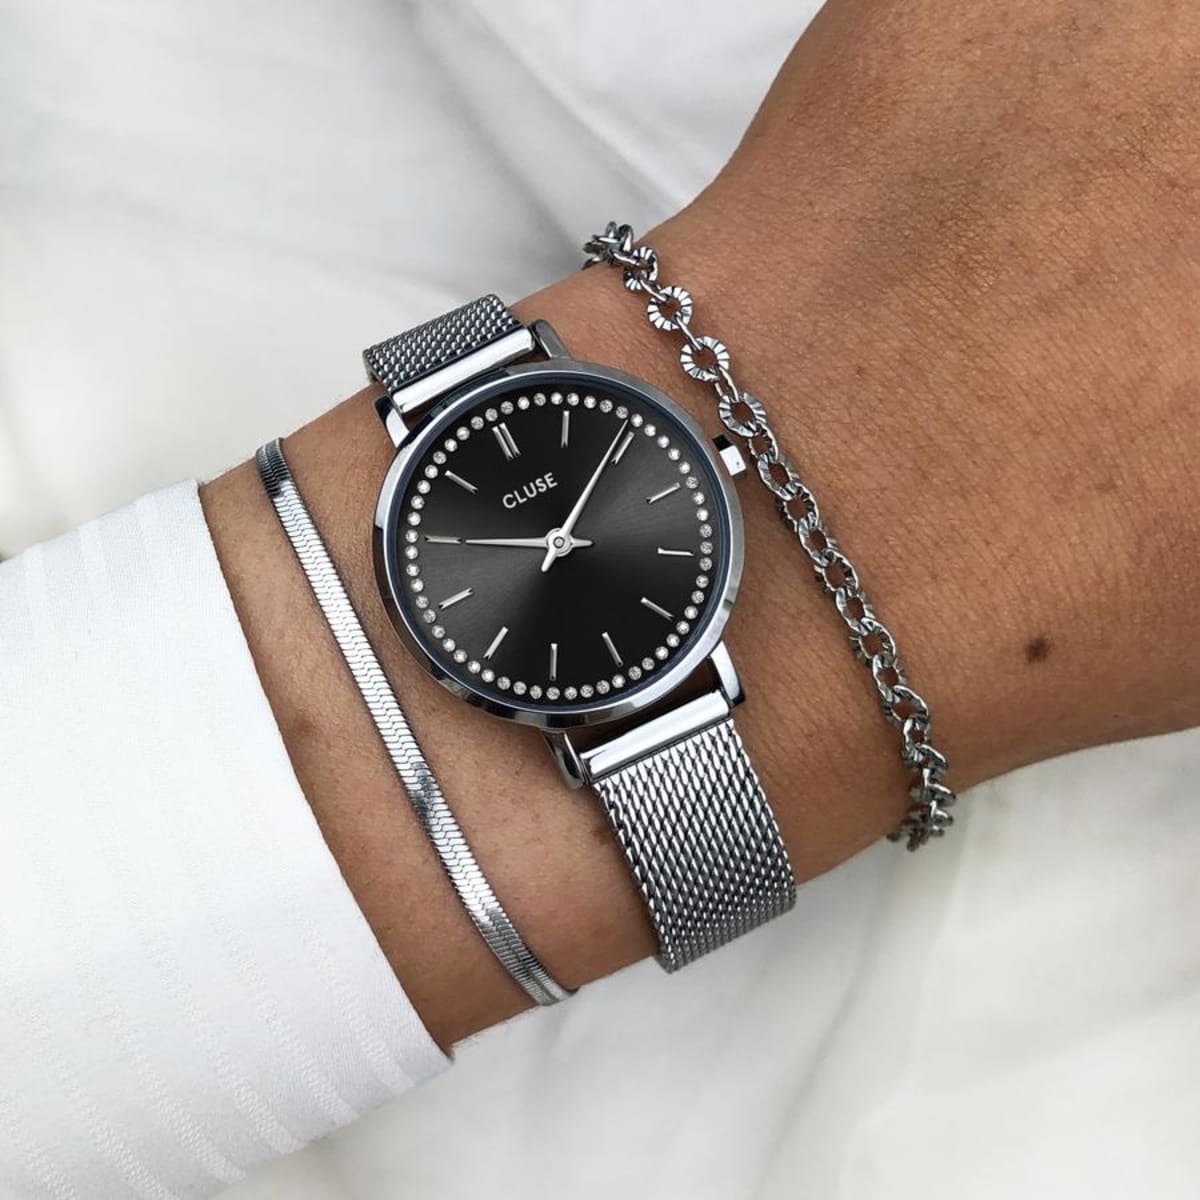 Small size, big dreams. With its refined 28 mm case, our Boho Chic Petite collection is your perfect companion if you prefer a smaller timepiece. Featuring a chic black dial, enchanting crystal embellishments and a timeless silver coloured case and strap. This watch will complement every look. Thanks to its stainless steel case and mesh strap, this watch is built to last.